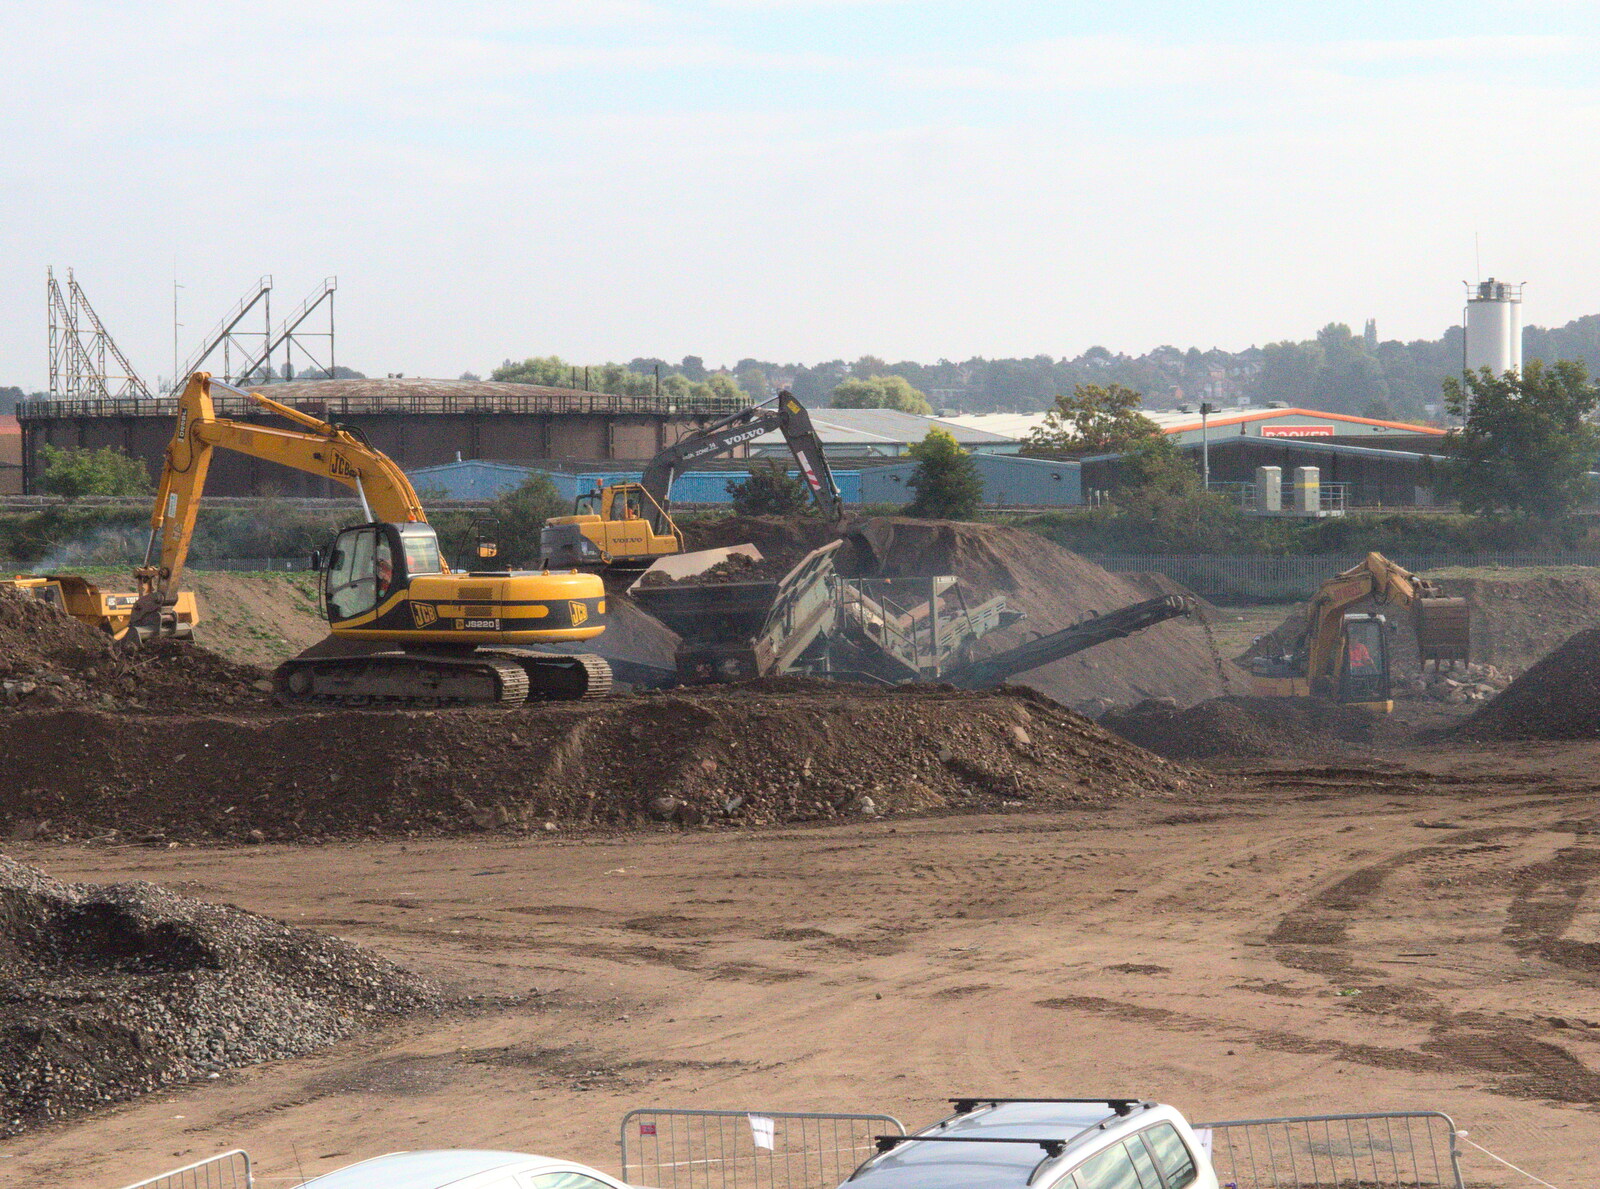 The bacon factory site is cleared from New Railway and a Trip to Ikea, Ipswich and Thurrock - 19th September 2014